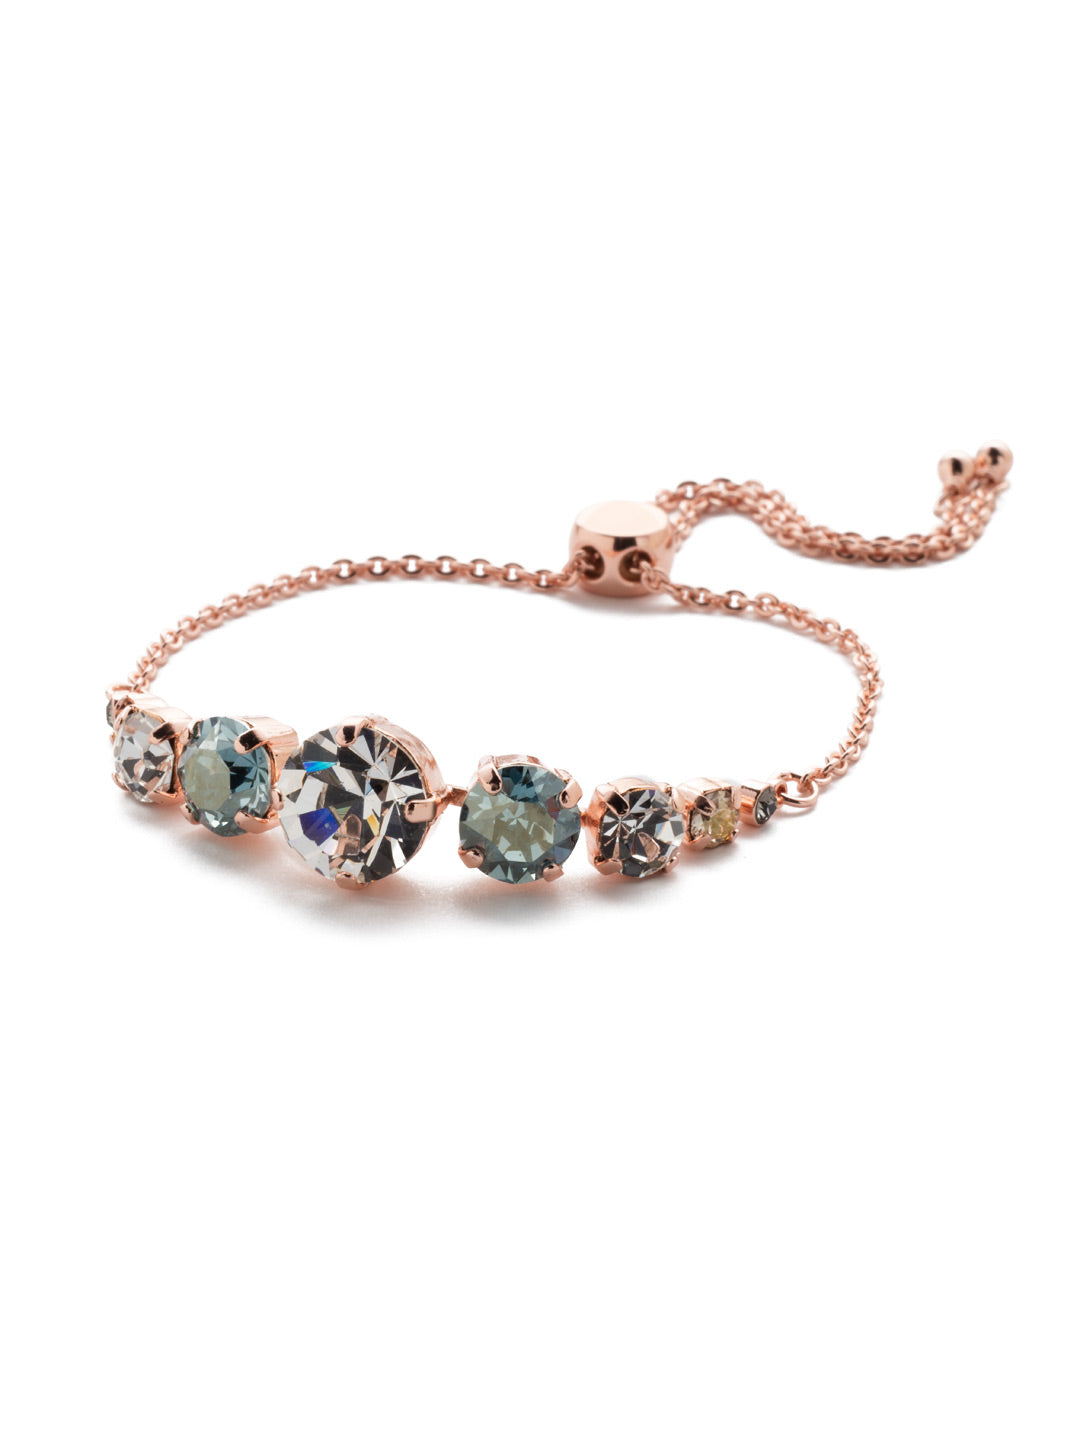 London Slider Bracelet - BCQ140RGCAZ - Slip on the London Slider Bracelet and adjust to your perfect fit. It's just the piece when you're looking to bling it on with some crystal sparkle. From Sorrelli's Crystal Azure collection in our Rose Gold-tone finish.